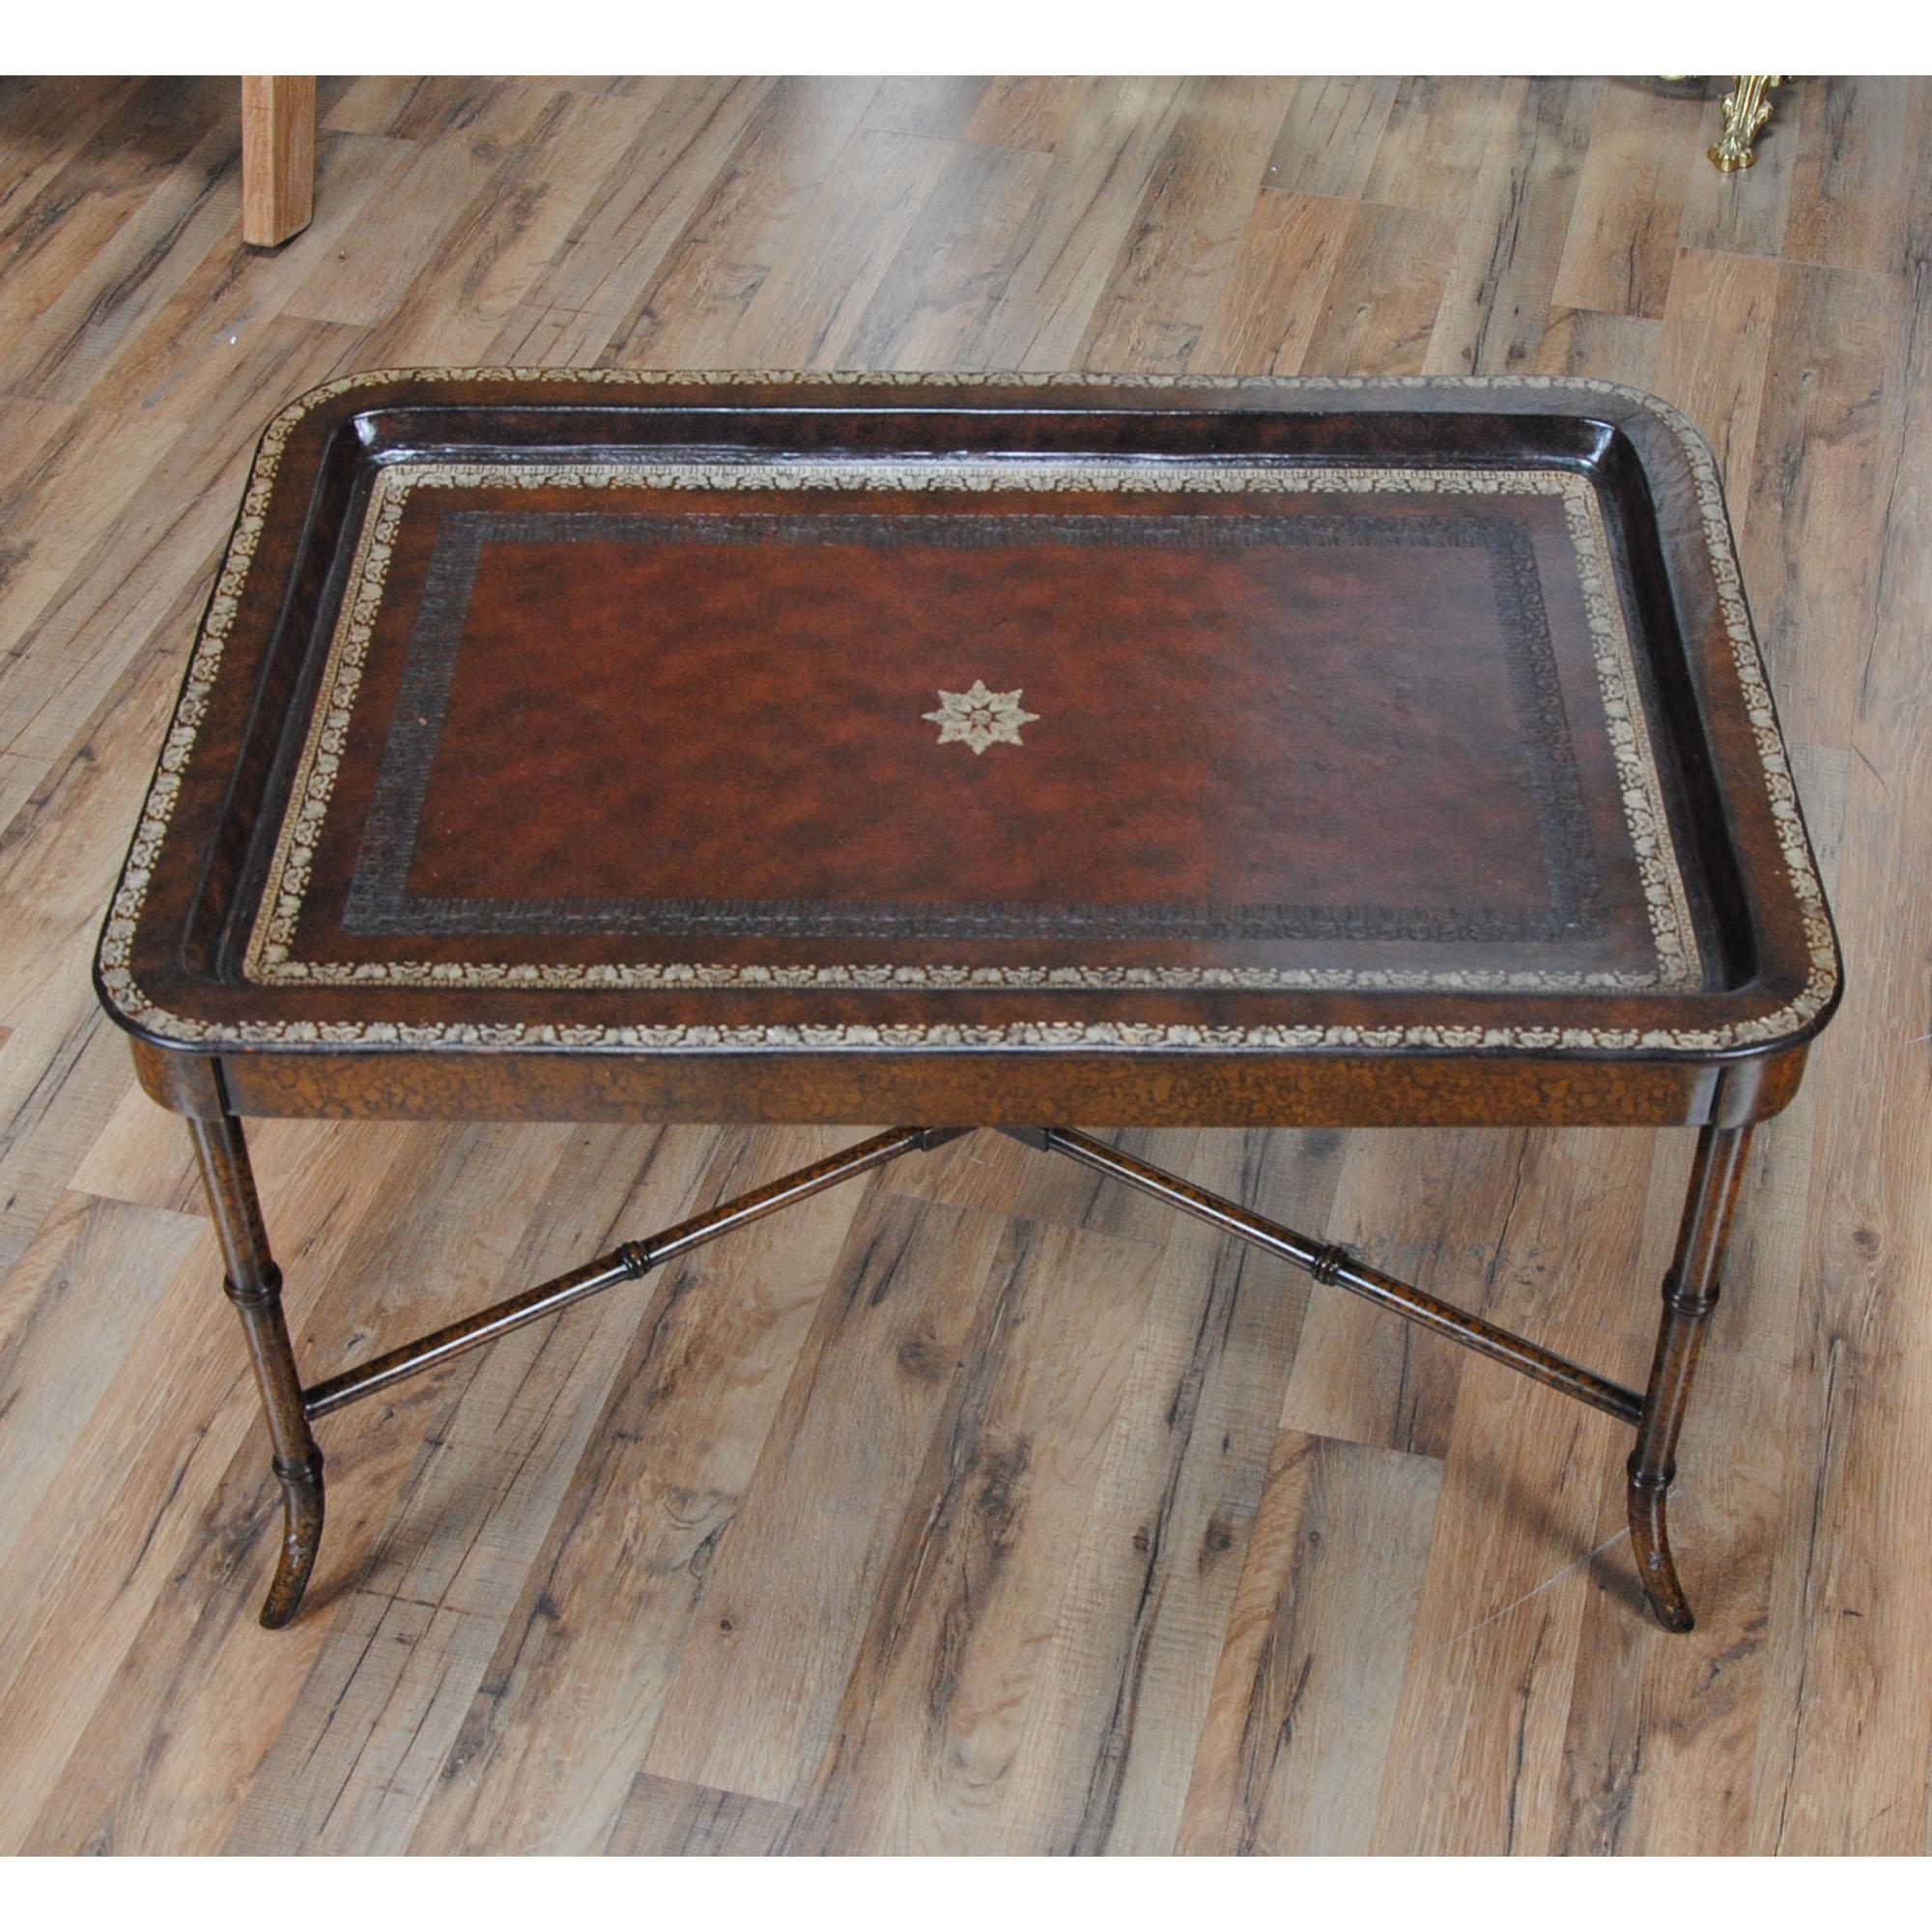 From Niagara Furniture, a Maitland Smith Leather Top Serving Table in excellent condition, featuring a remarkably tooled, removable leather top which doubles as a serving tray. Both elegant and incredibly detailed this beautiful Maitland Smith